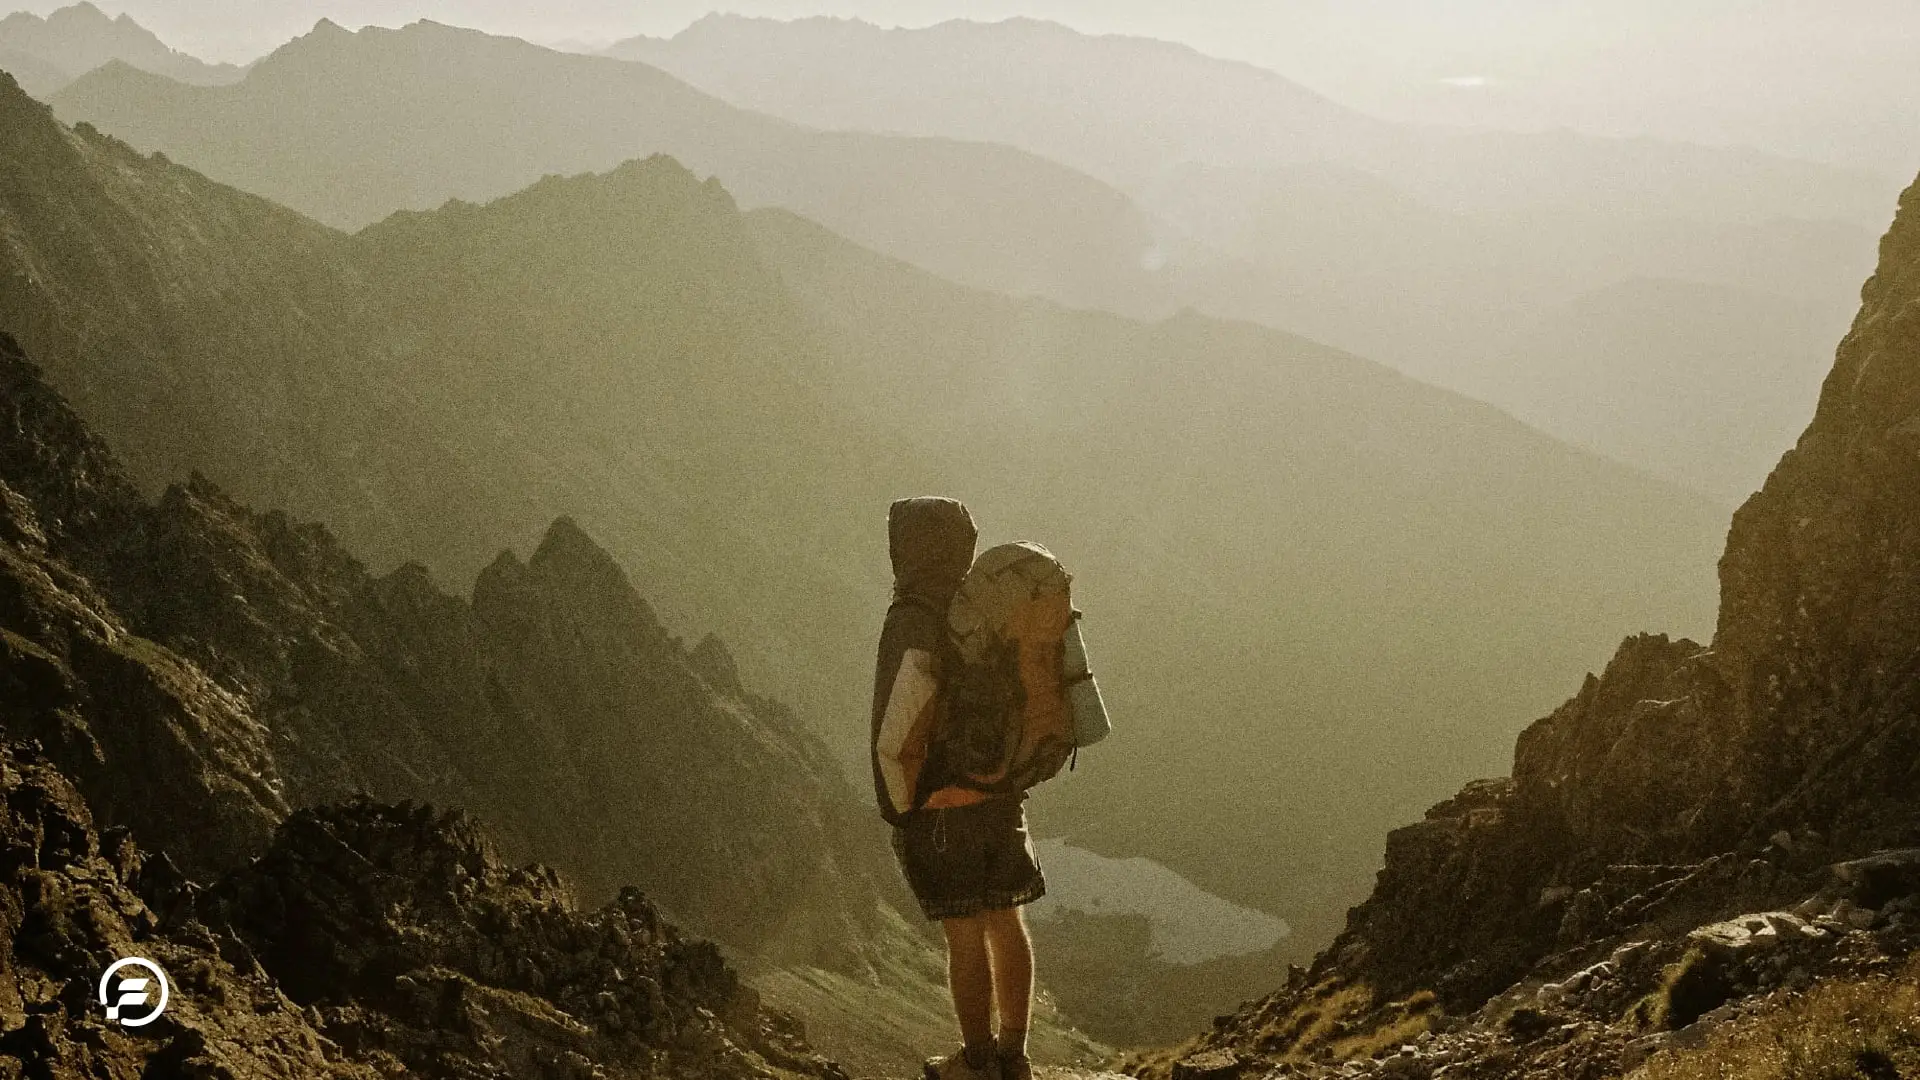 A backpacker making his way through the mountains.